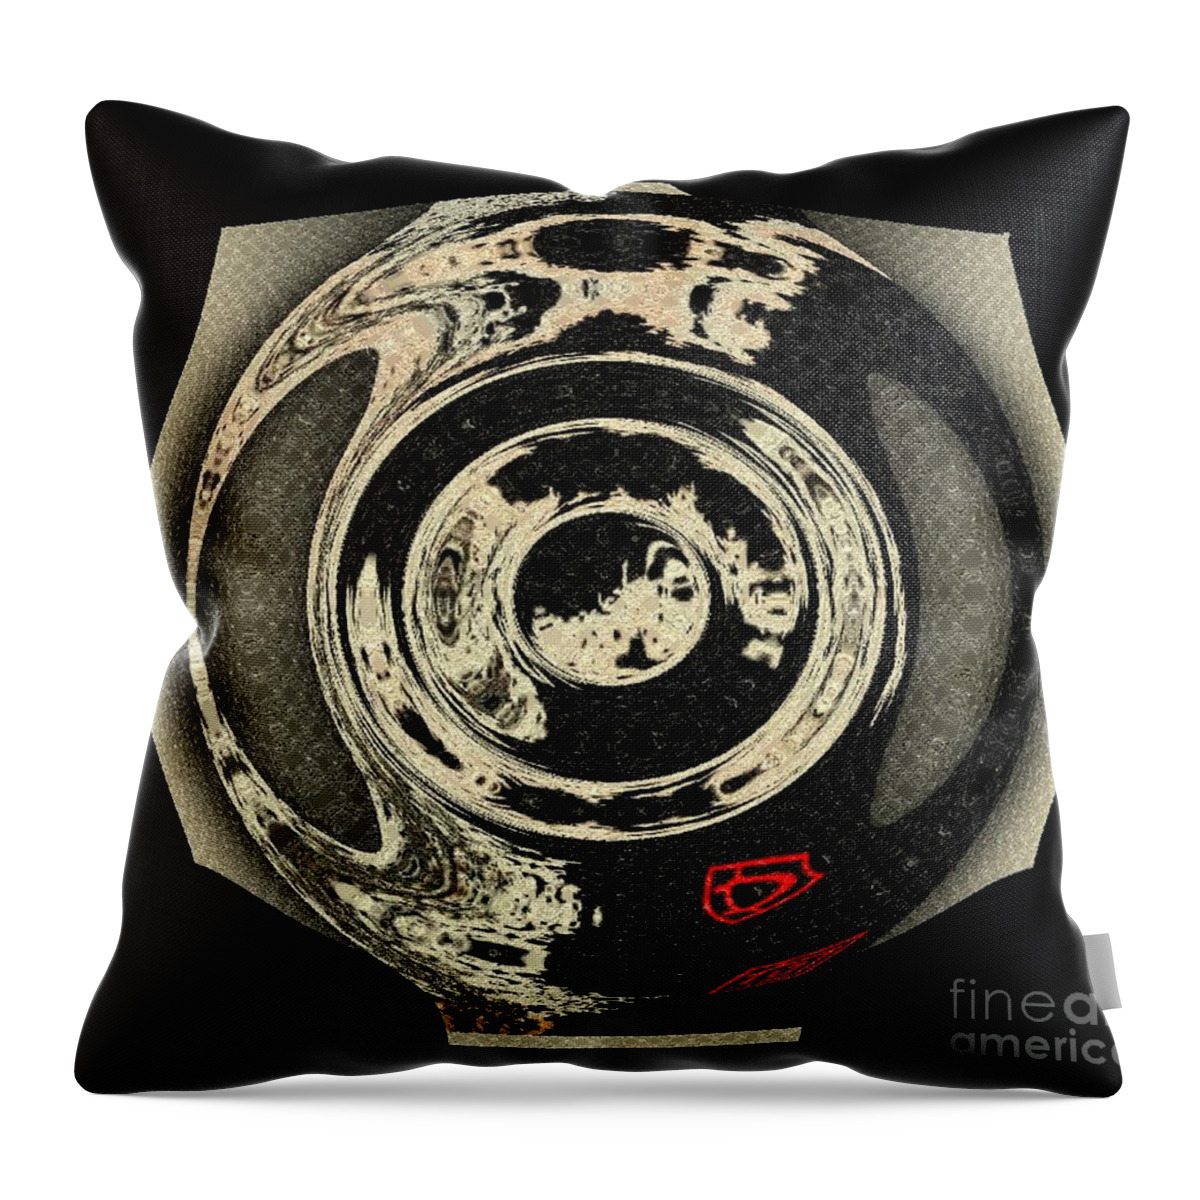 Abstract Throw Pillow featuring the digital art Abstract Japanese Vase Black by Dorlea Ho